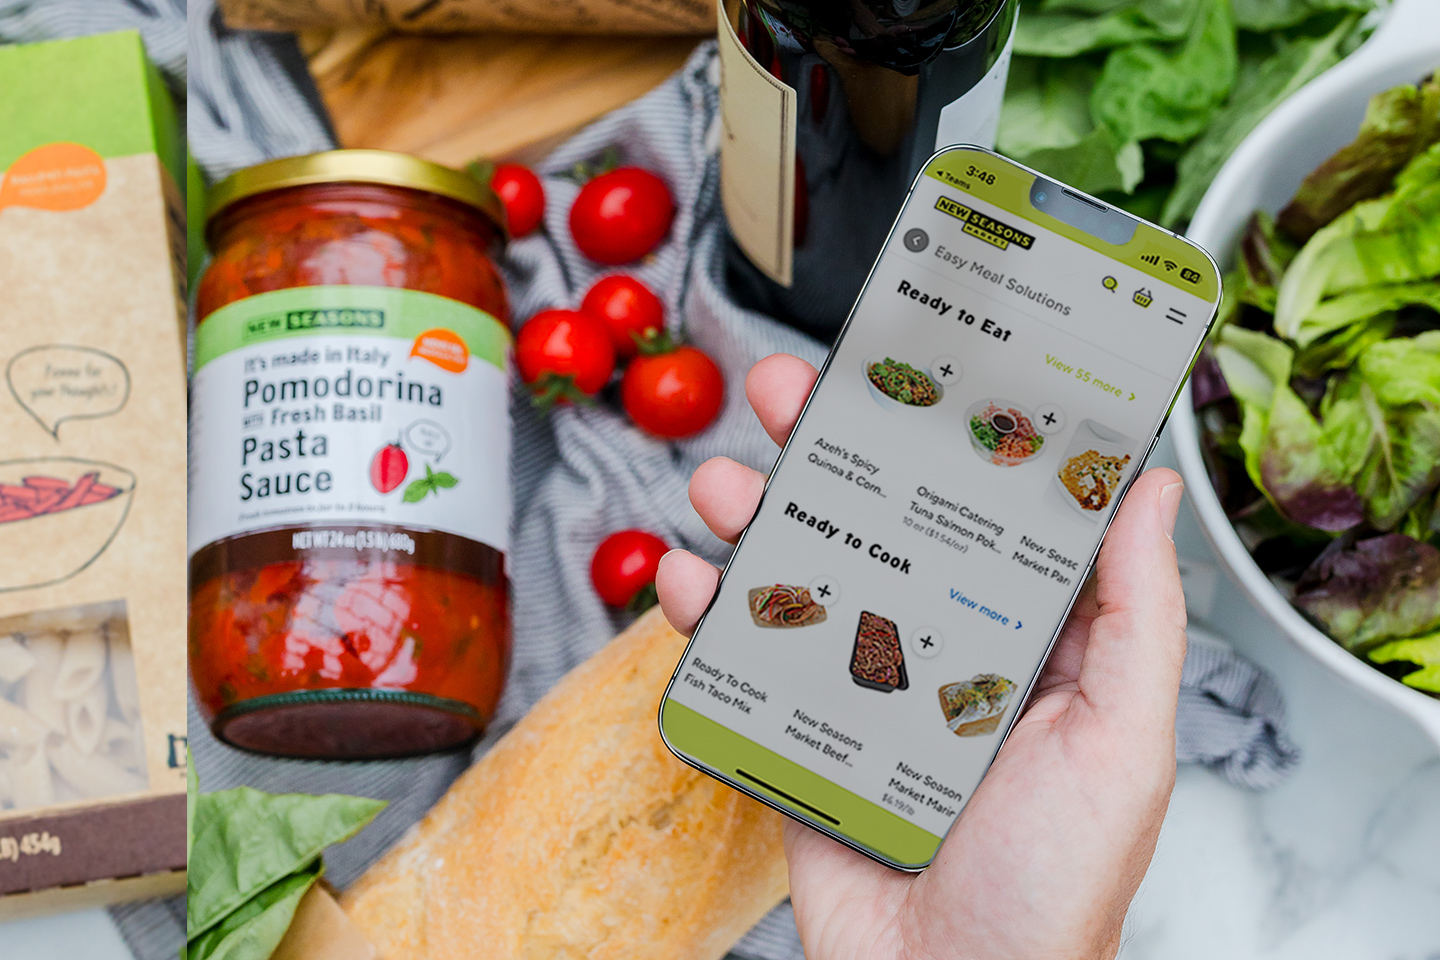 A hand holding a phone featuring an online shopping app with a tabletop in the background displaying a jar of marinara sauce, a box of dried pasta, a glass of wine, and a salad in a bowl.